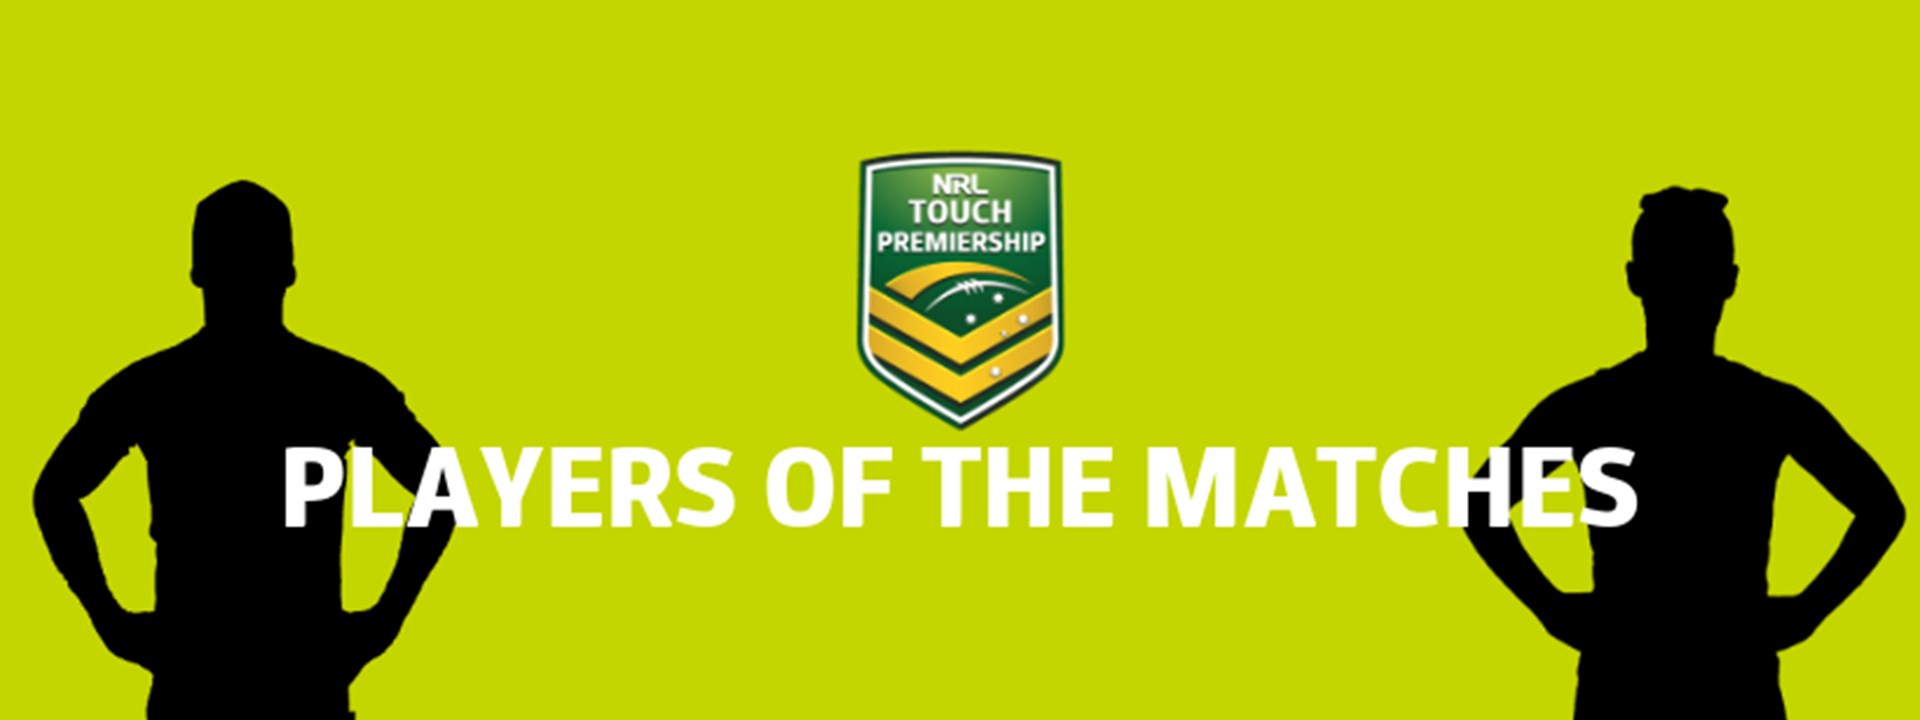 Copy-of-NRL-Touch-Premiership_24035.png